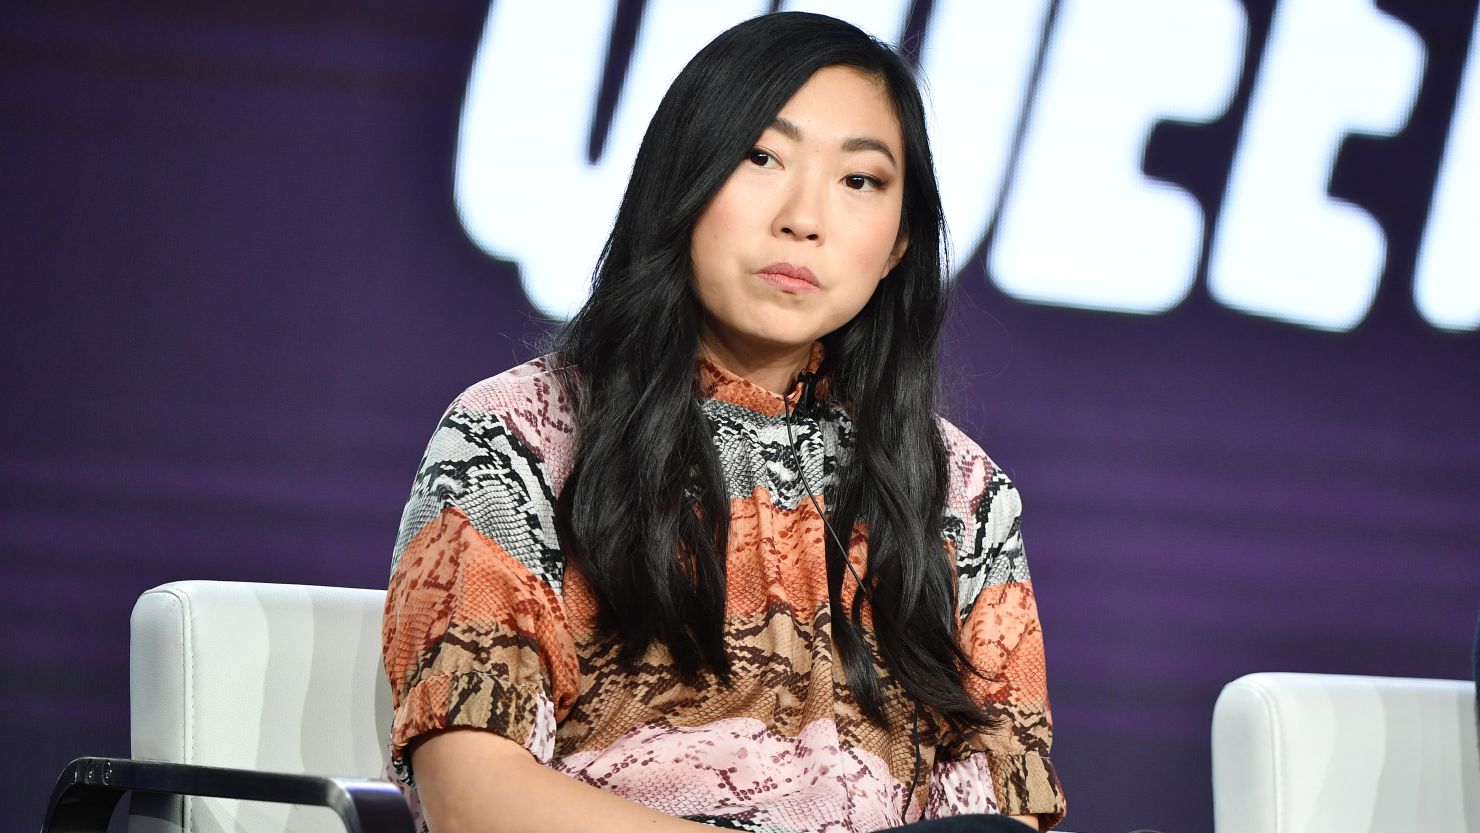 Awkwafina talk about Oscar nominations at the Television Critics Association press tour in Pasadena, California, on Tuesday, on January 14, 2020.